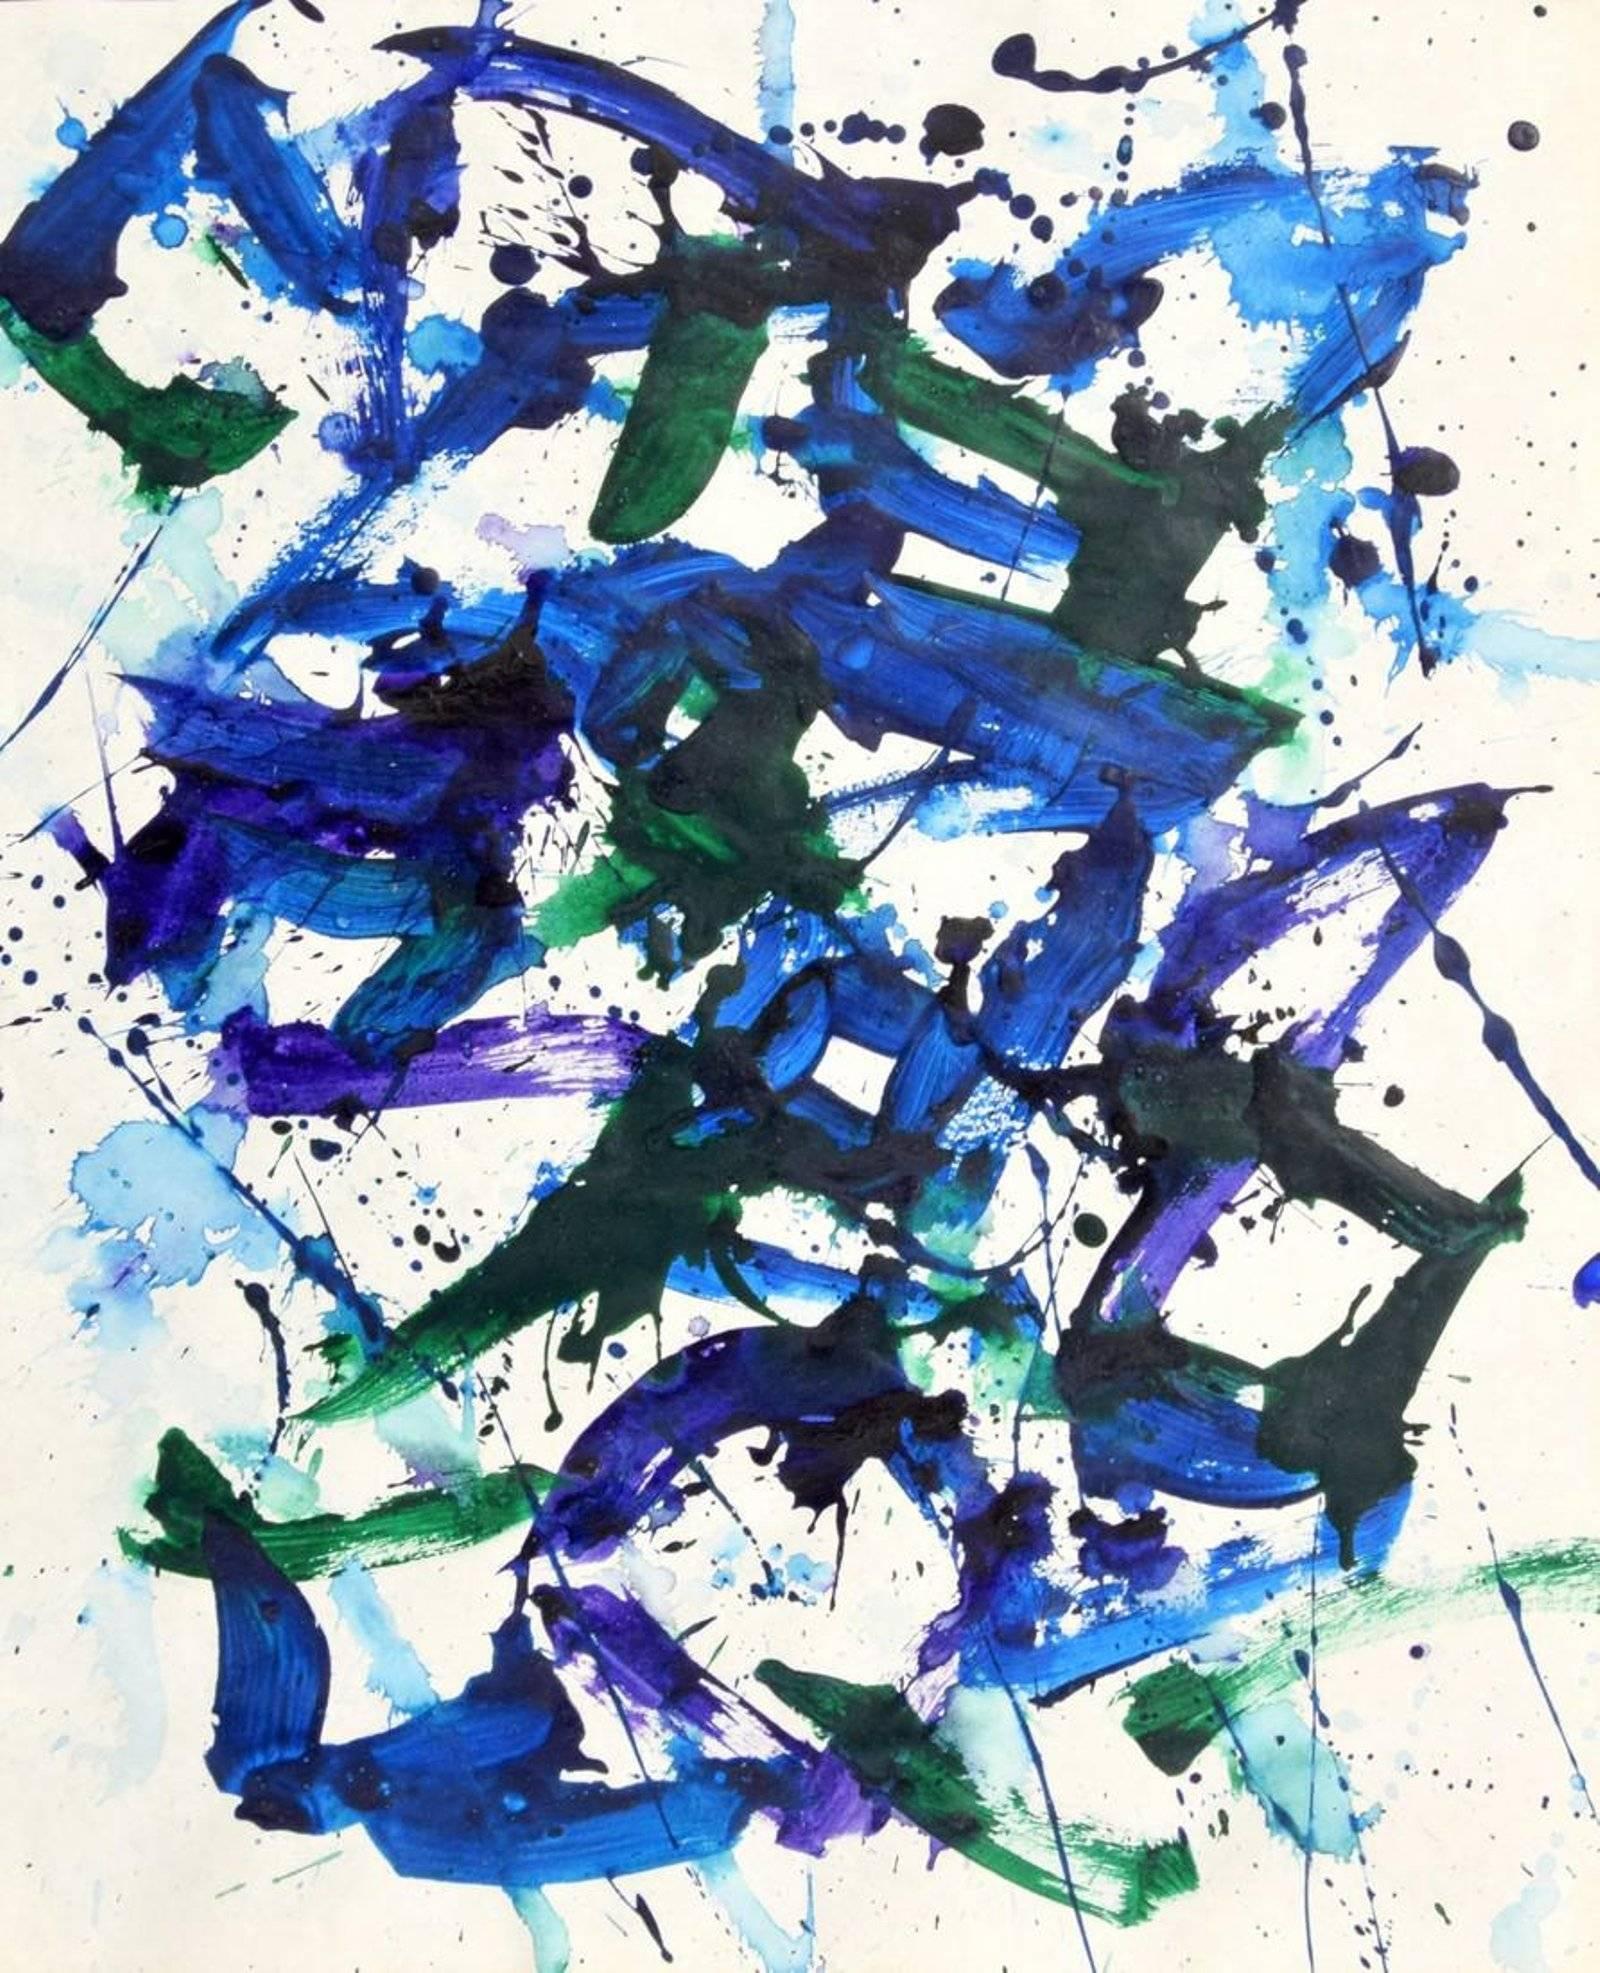 Painting by Sam Francis (1923-1994). Work is no. SF78-1191. Lot is accompanied by a copy of the receipt issued 5.6.2005 by Sotheby's Milan, Italy. Provenance: Estate of the artist, California Gallery Delaive, Amsterdam, Netherlands unverified